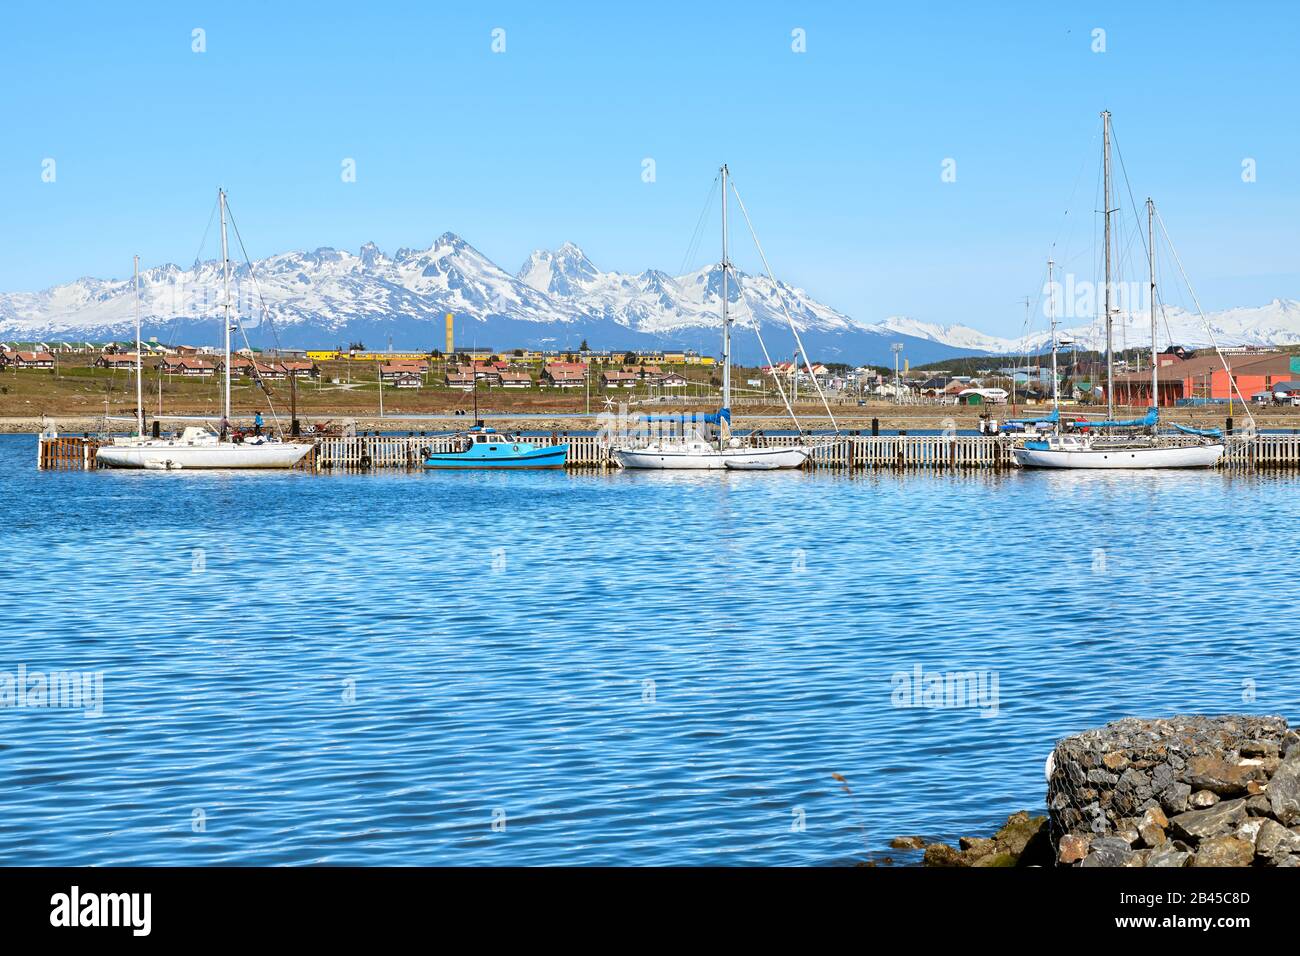 Port of Ushuaia, capital of Tierra del Fuego Province and the southernmost city in the world, Argentina. Stock Photo